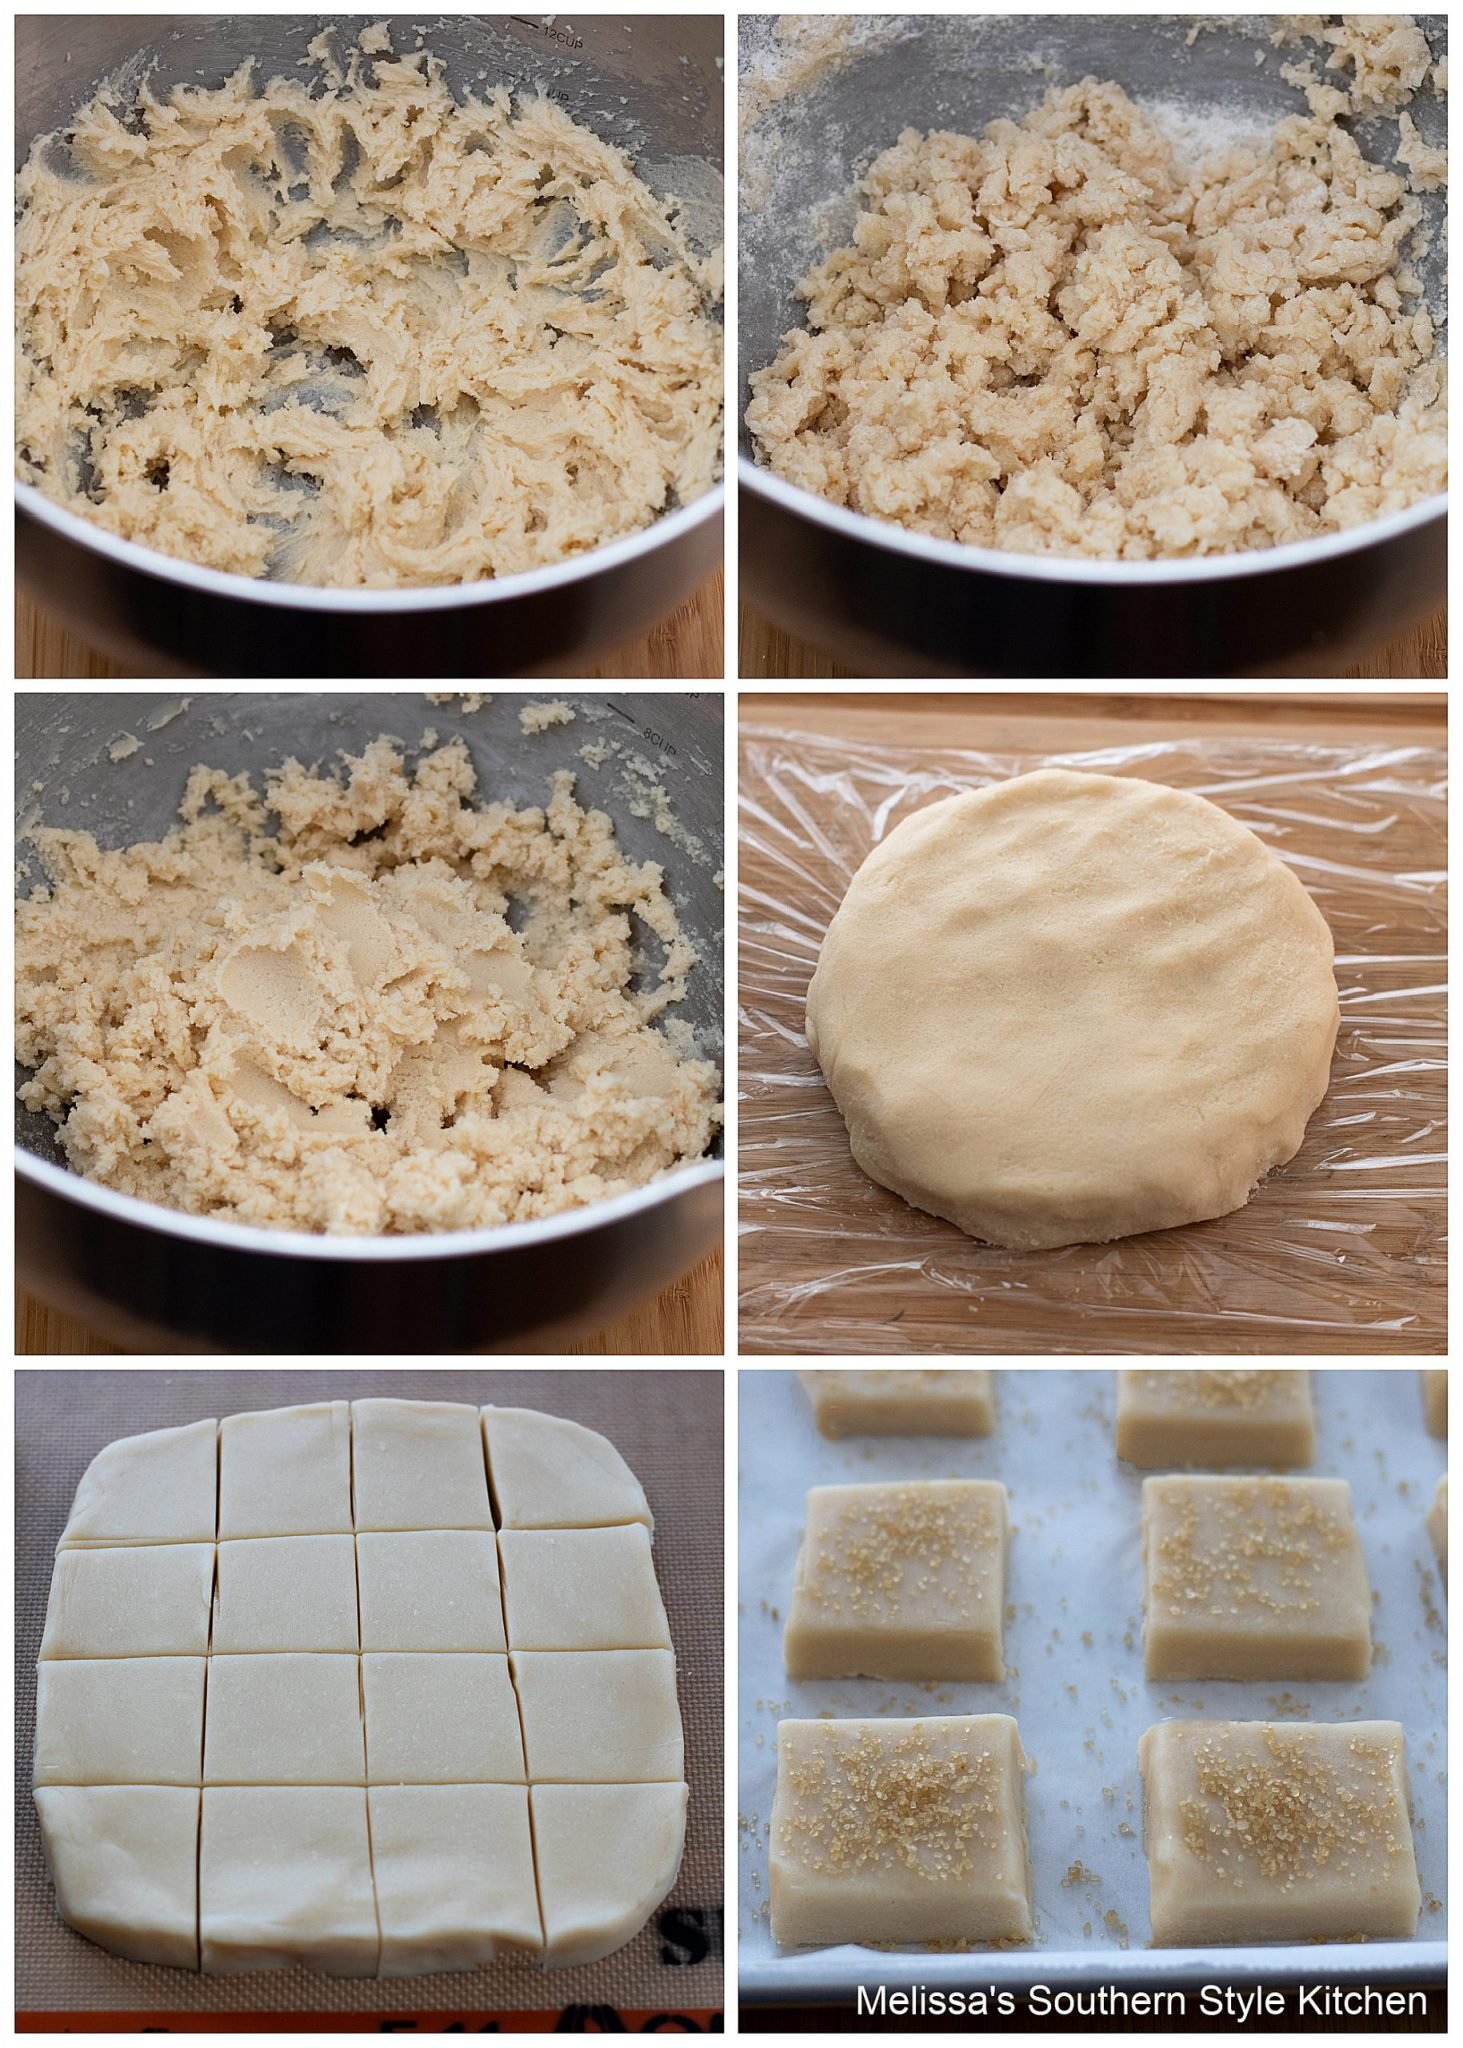 step-by-step preparaion images and ingredients for shortbread